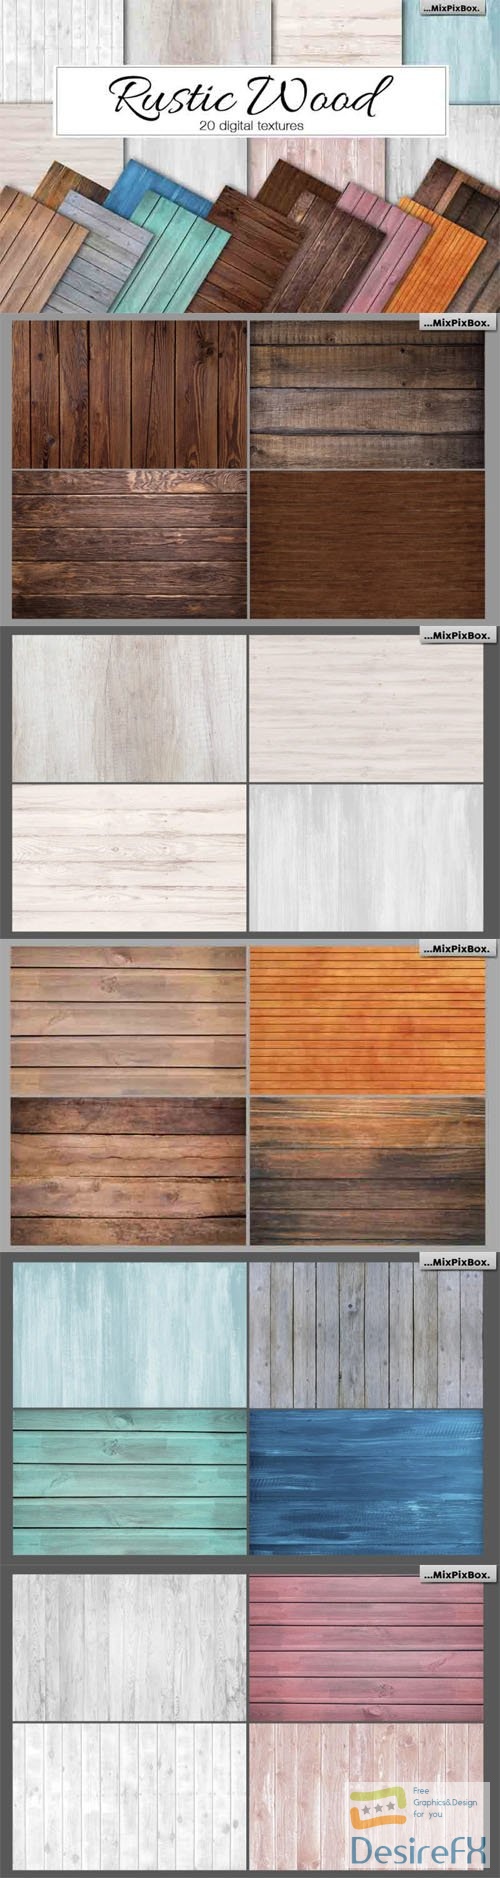 20 Rustic Wood Textures Collection